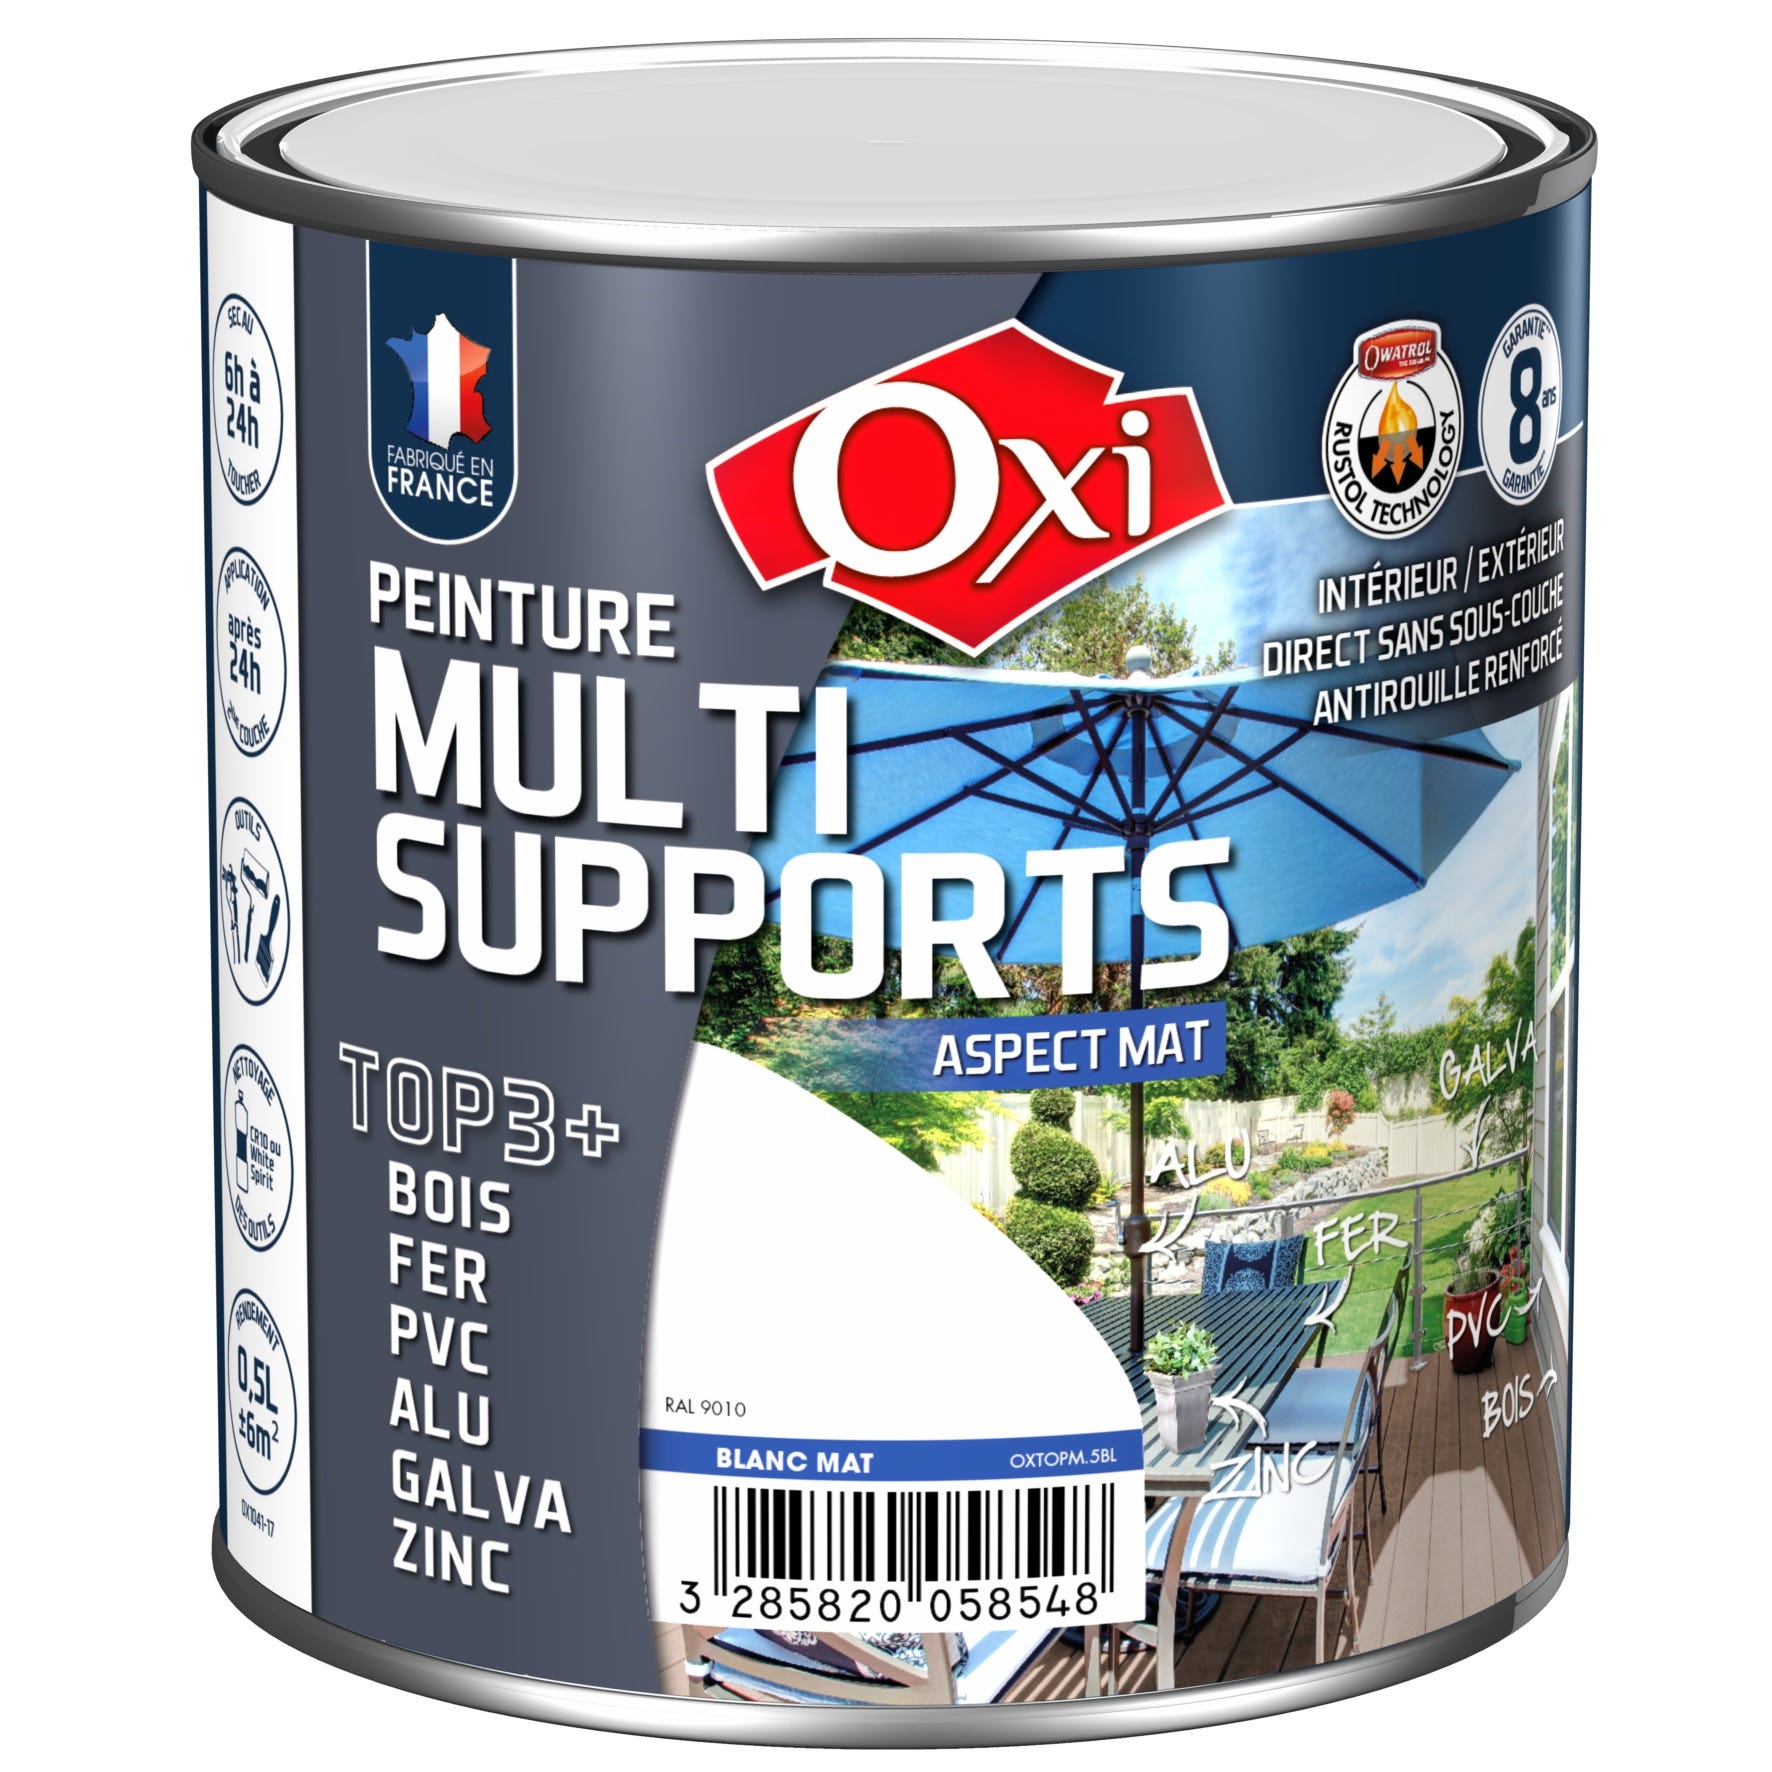 Top 3 Multi Supports Owatrol PEINTURE MULTI SUPPORTS MAT Anthracite RAL 7016 0.5 litre 0